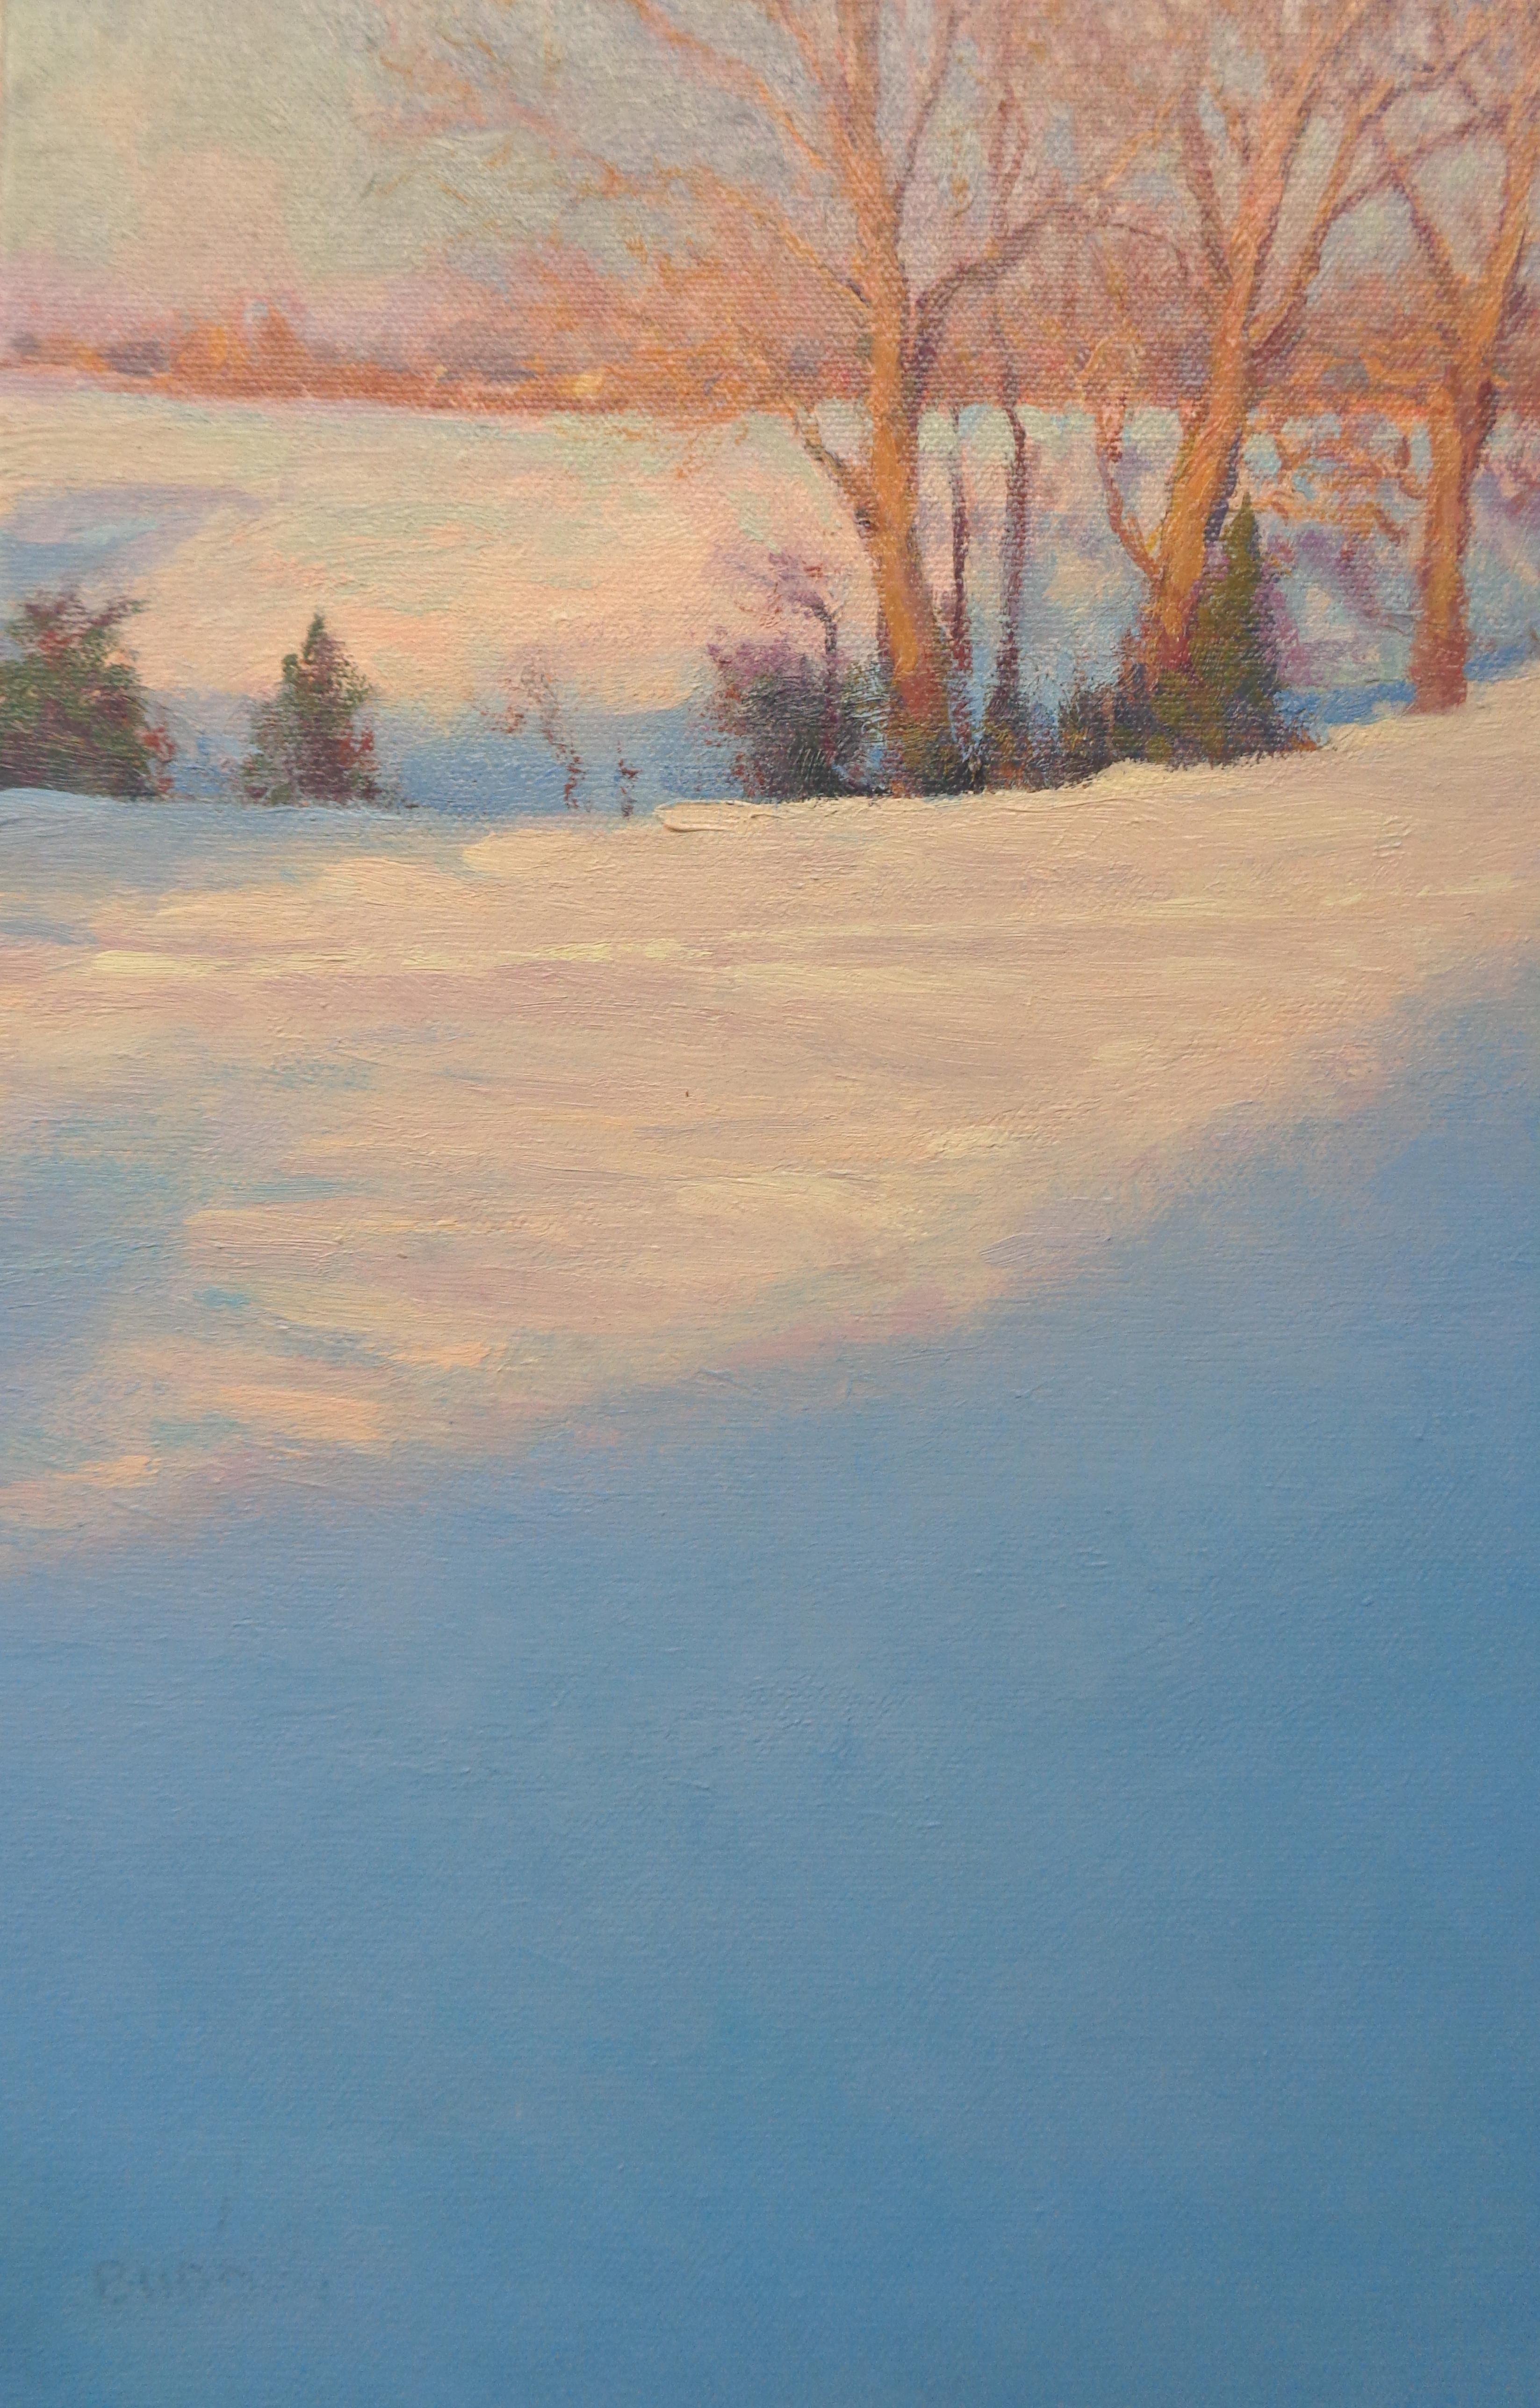 An oil painting on canvas by award winning contemporary artist Michael Budden that showcases a beautiful winter landscape with later afternoon light casting long shadows. The image measures 14 x 18 unframed.  
ARTIST'S STATEMENT
I have been in the